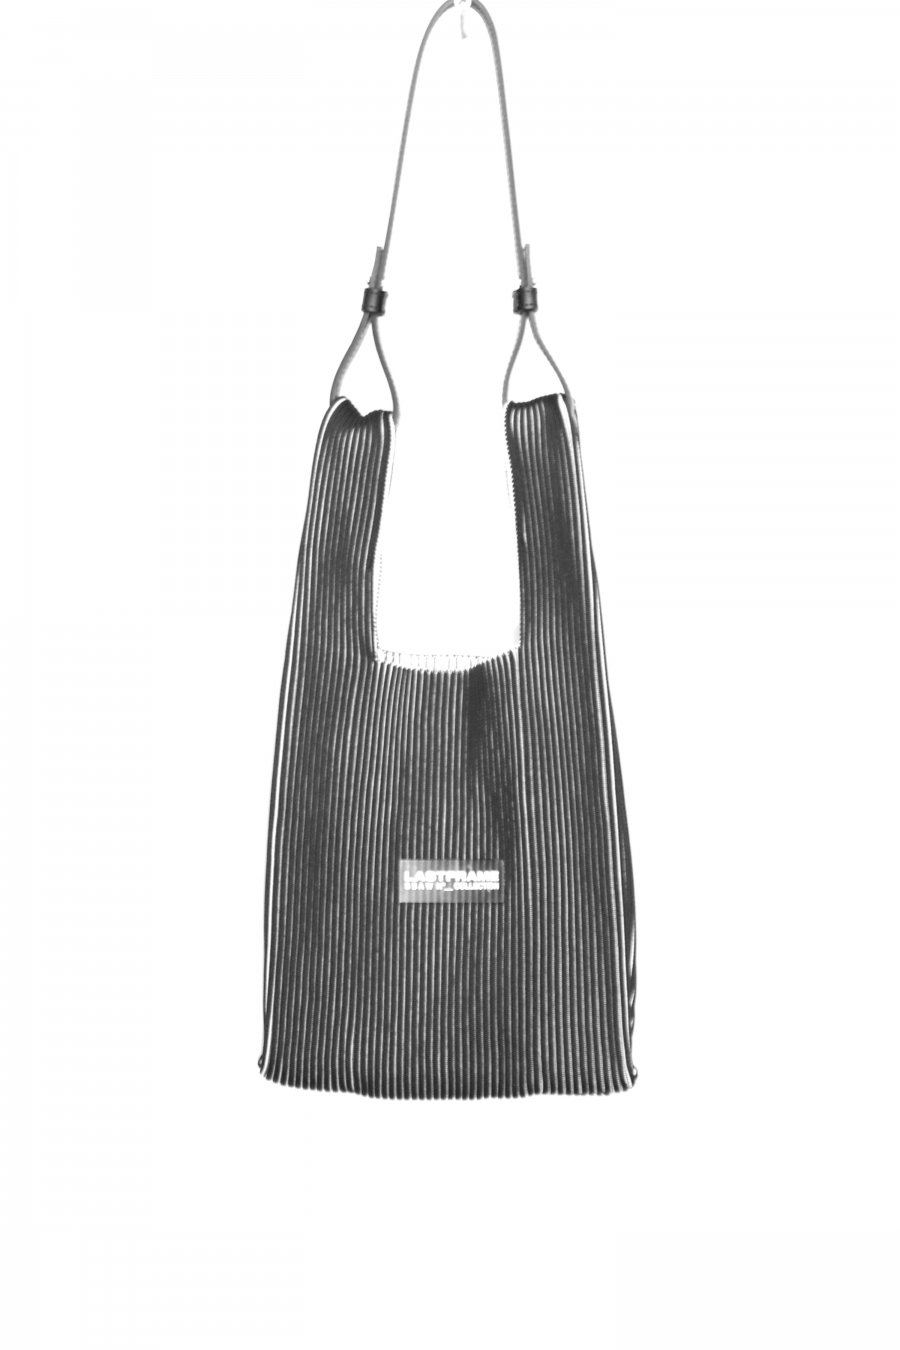 LASTFRAME(ラストフレーム)のTWO TONE MARKET BAG SMALL BLACK x IVORY ...